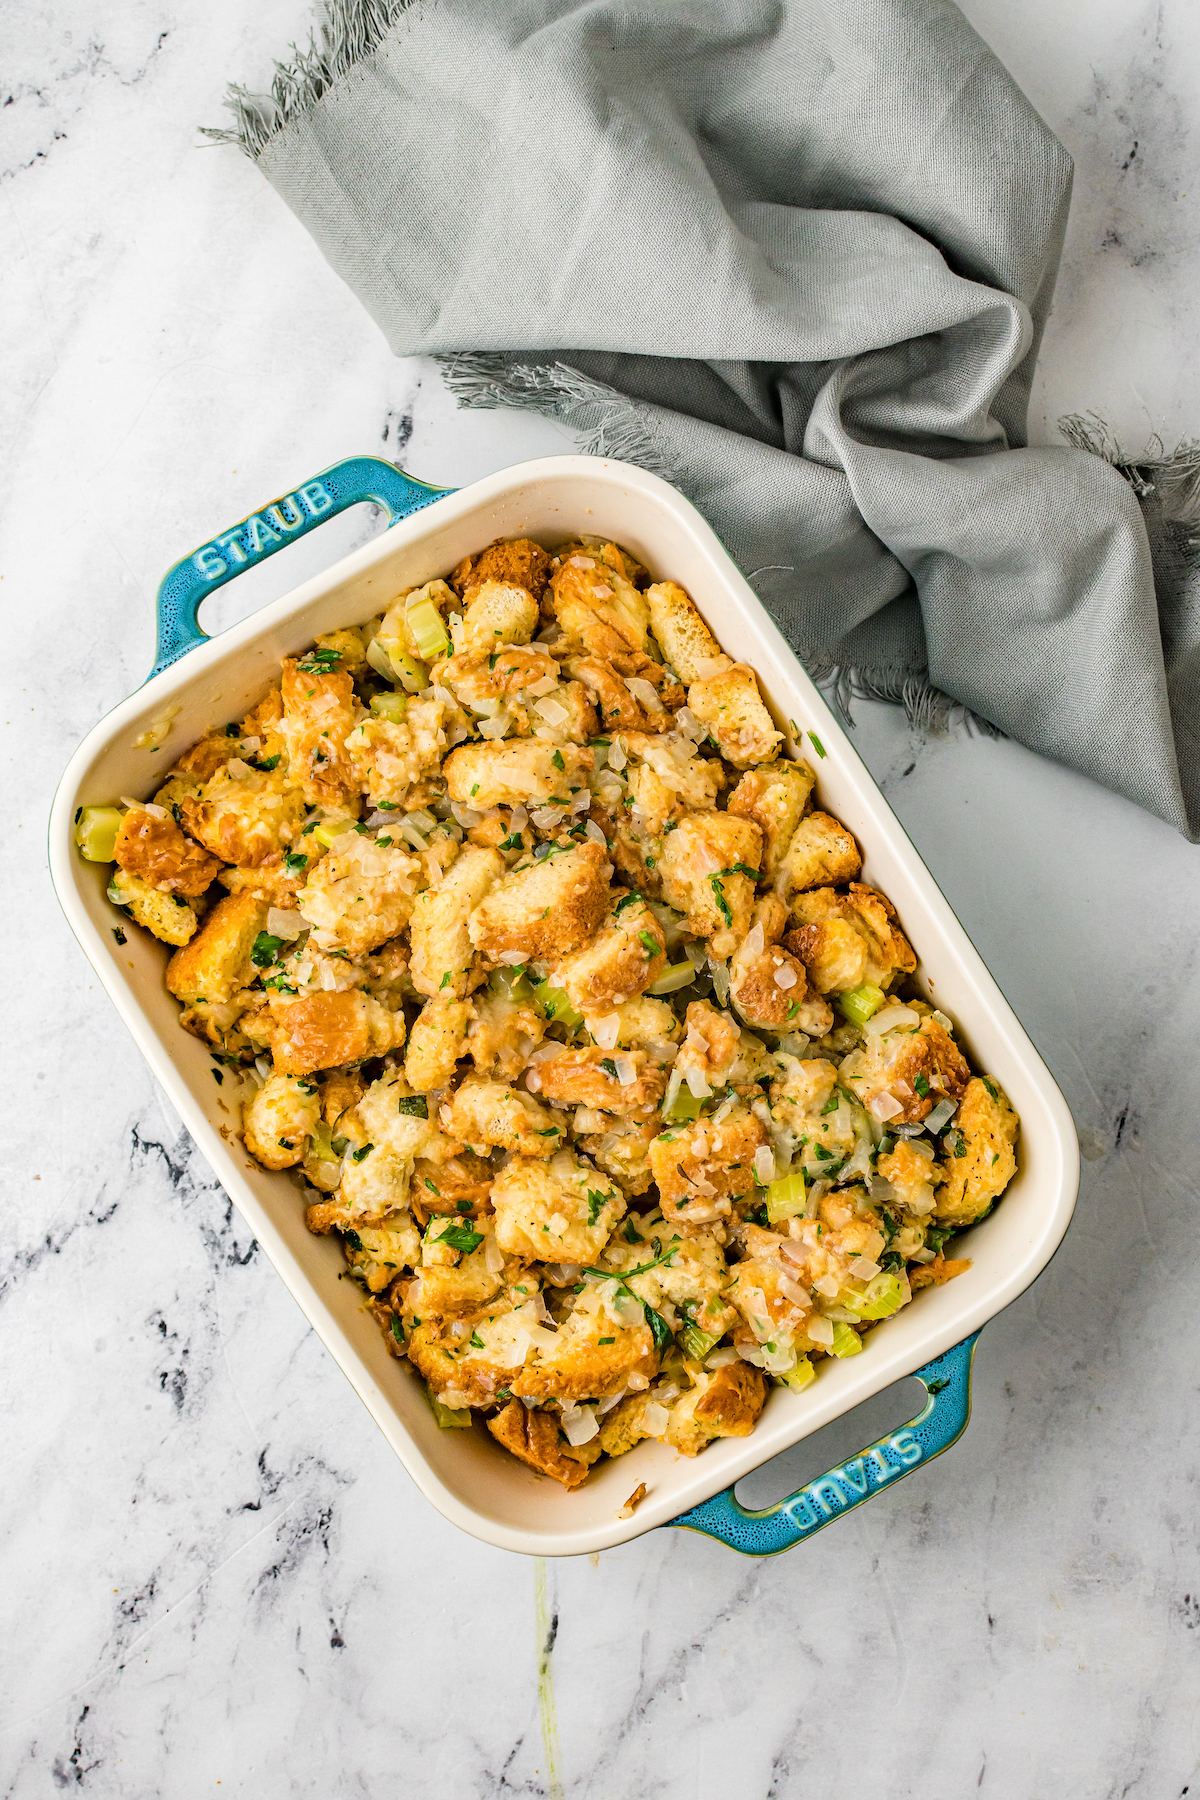 A casserole dish full of Texas toast cubes, celery, herbs, and onion.